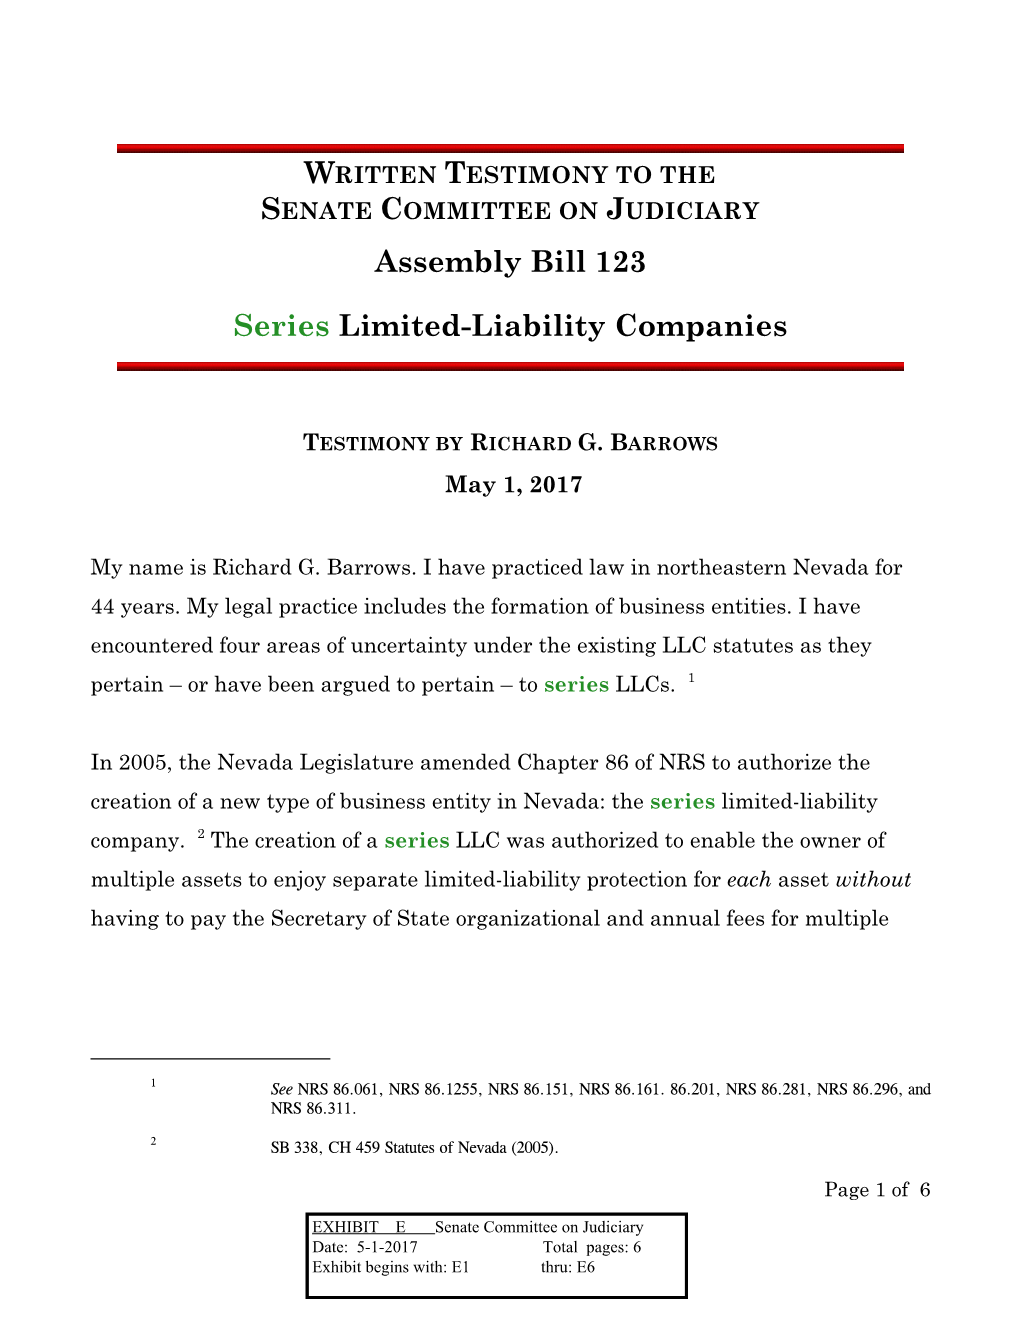 Assembly Bill 123 Series Limited-Liability Companies